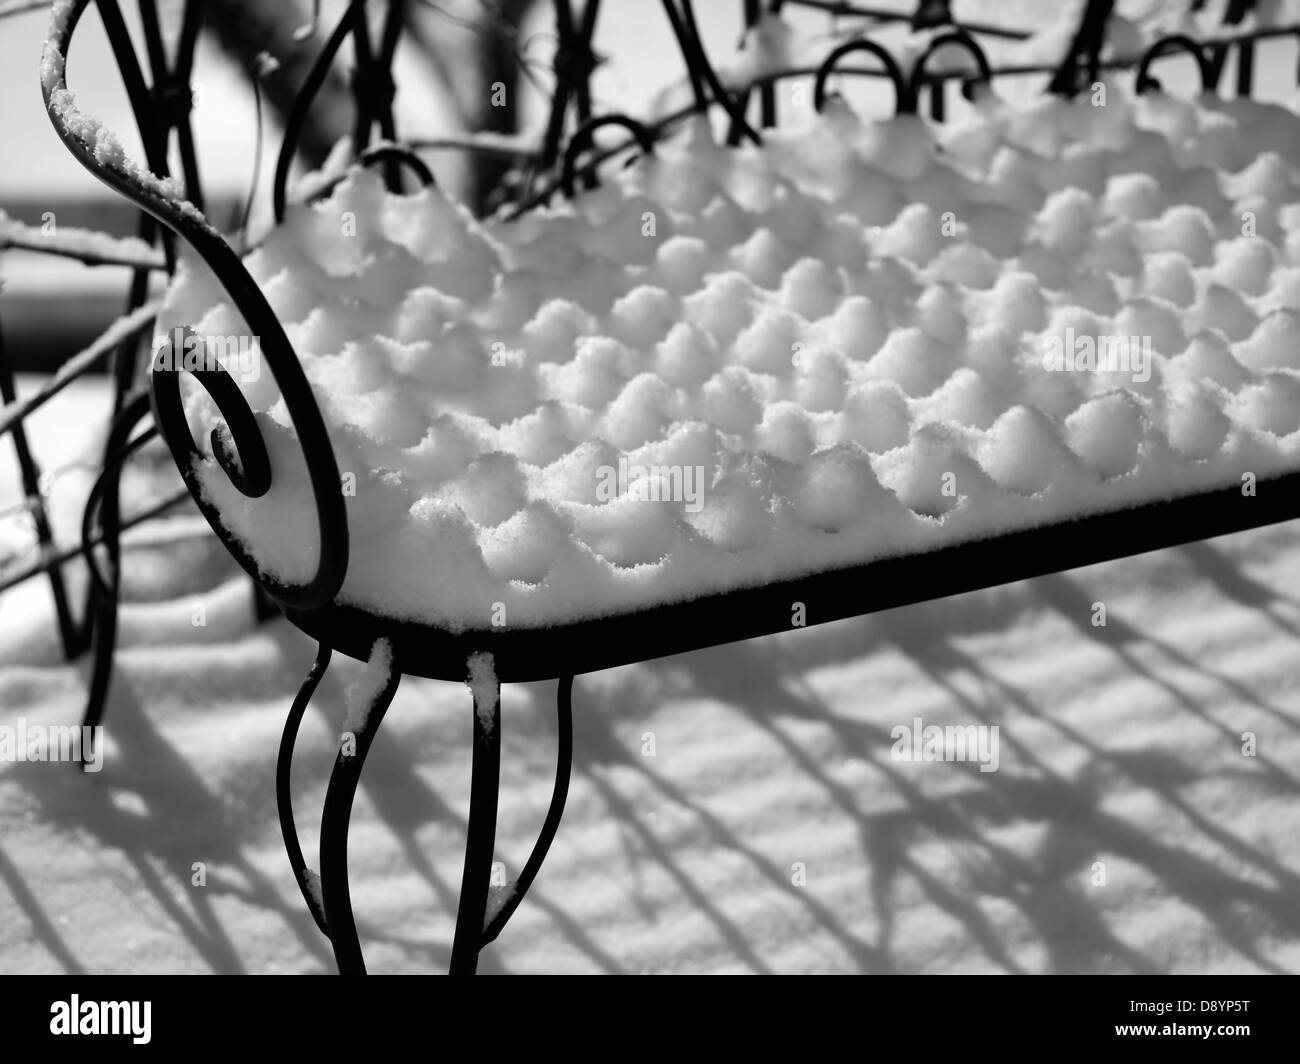 Garden furniture covered in snow. Stock Photo